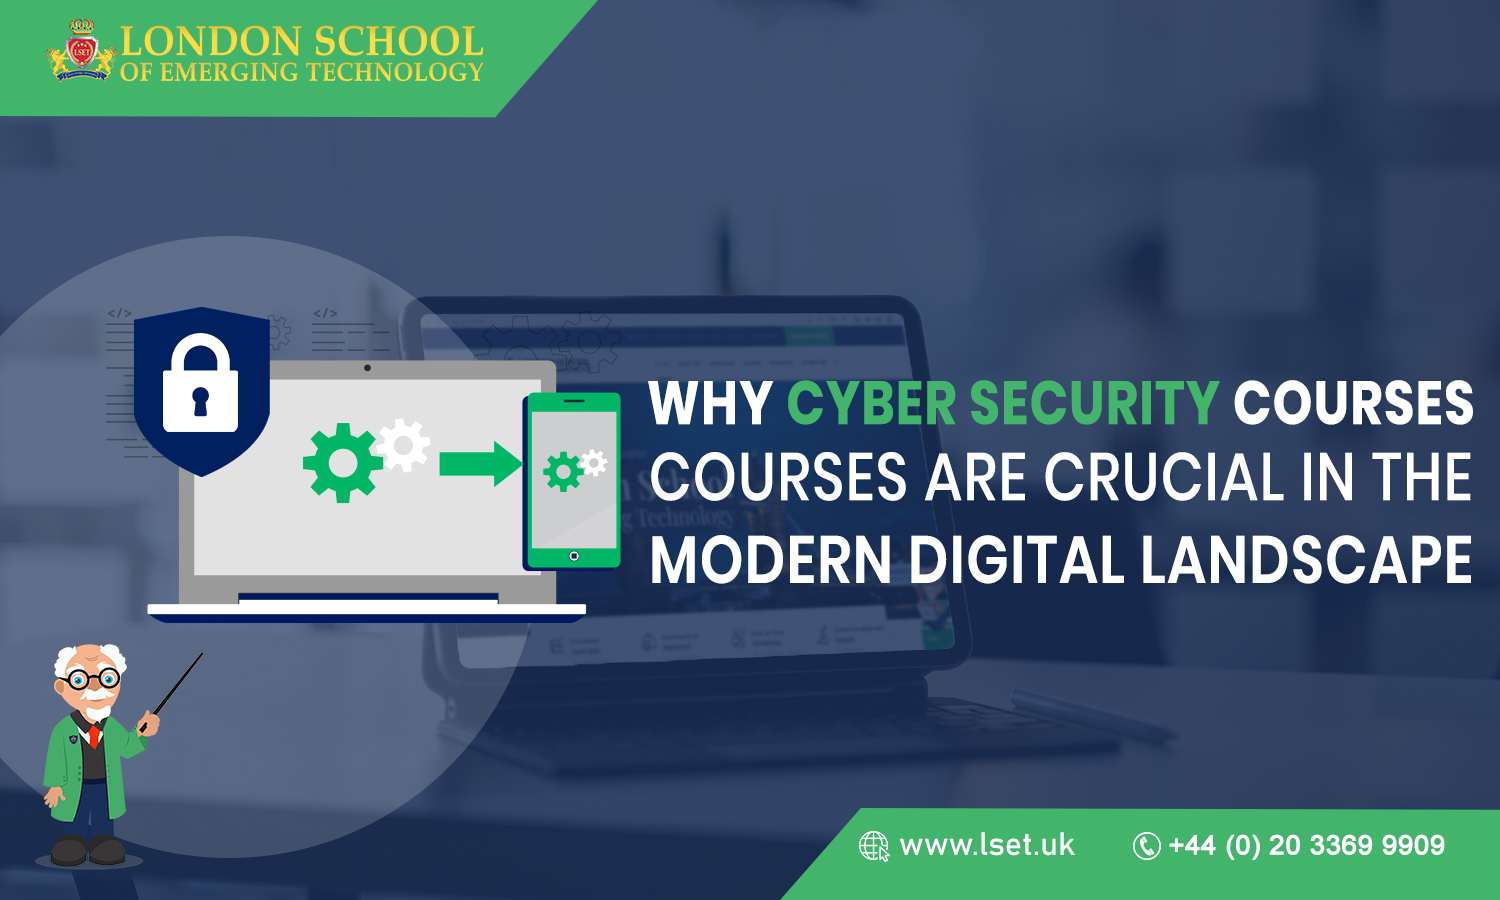 Why Cyber Security Courses are Crucial in the Modern Digital Landscape